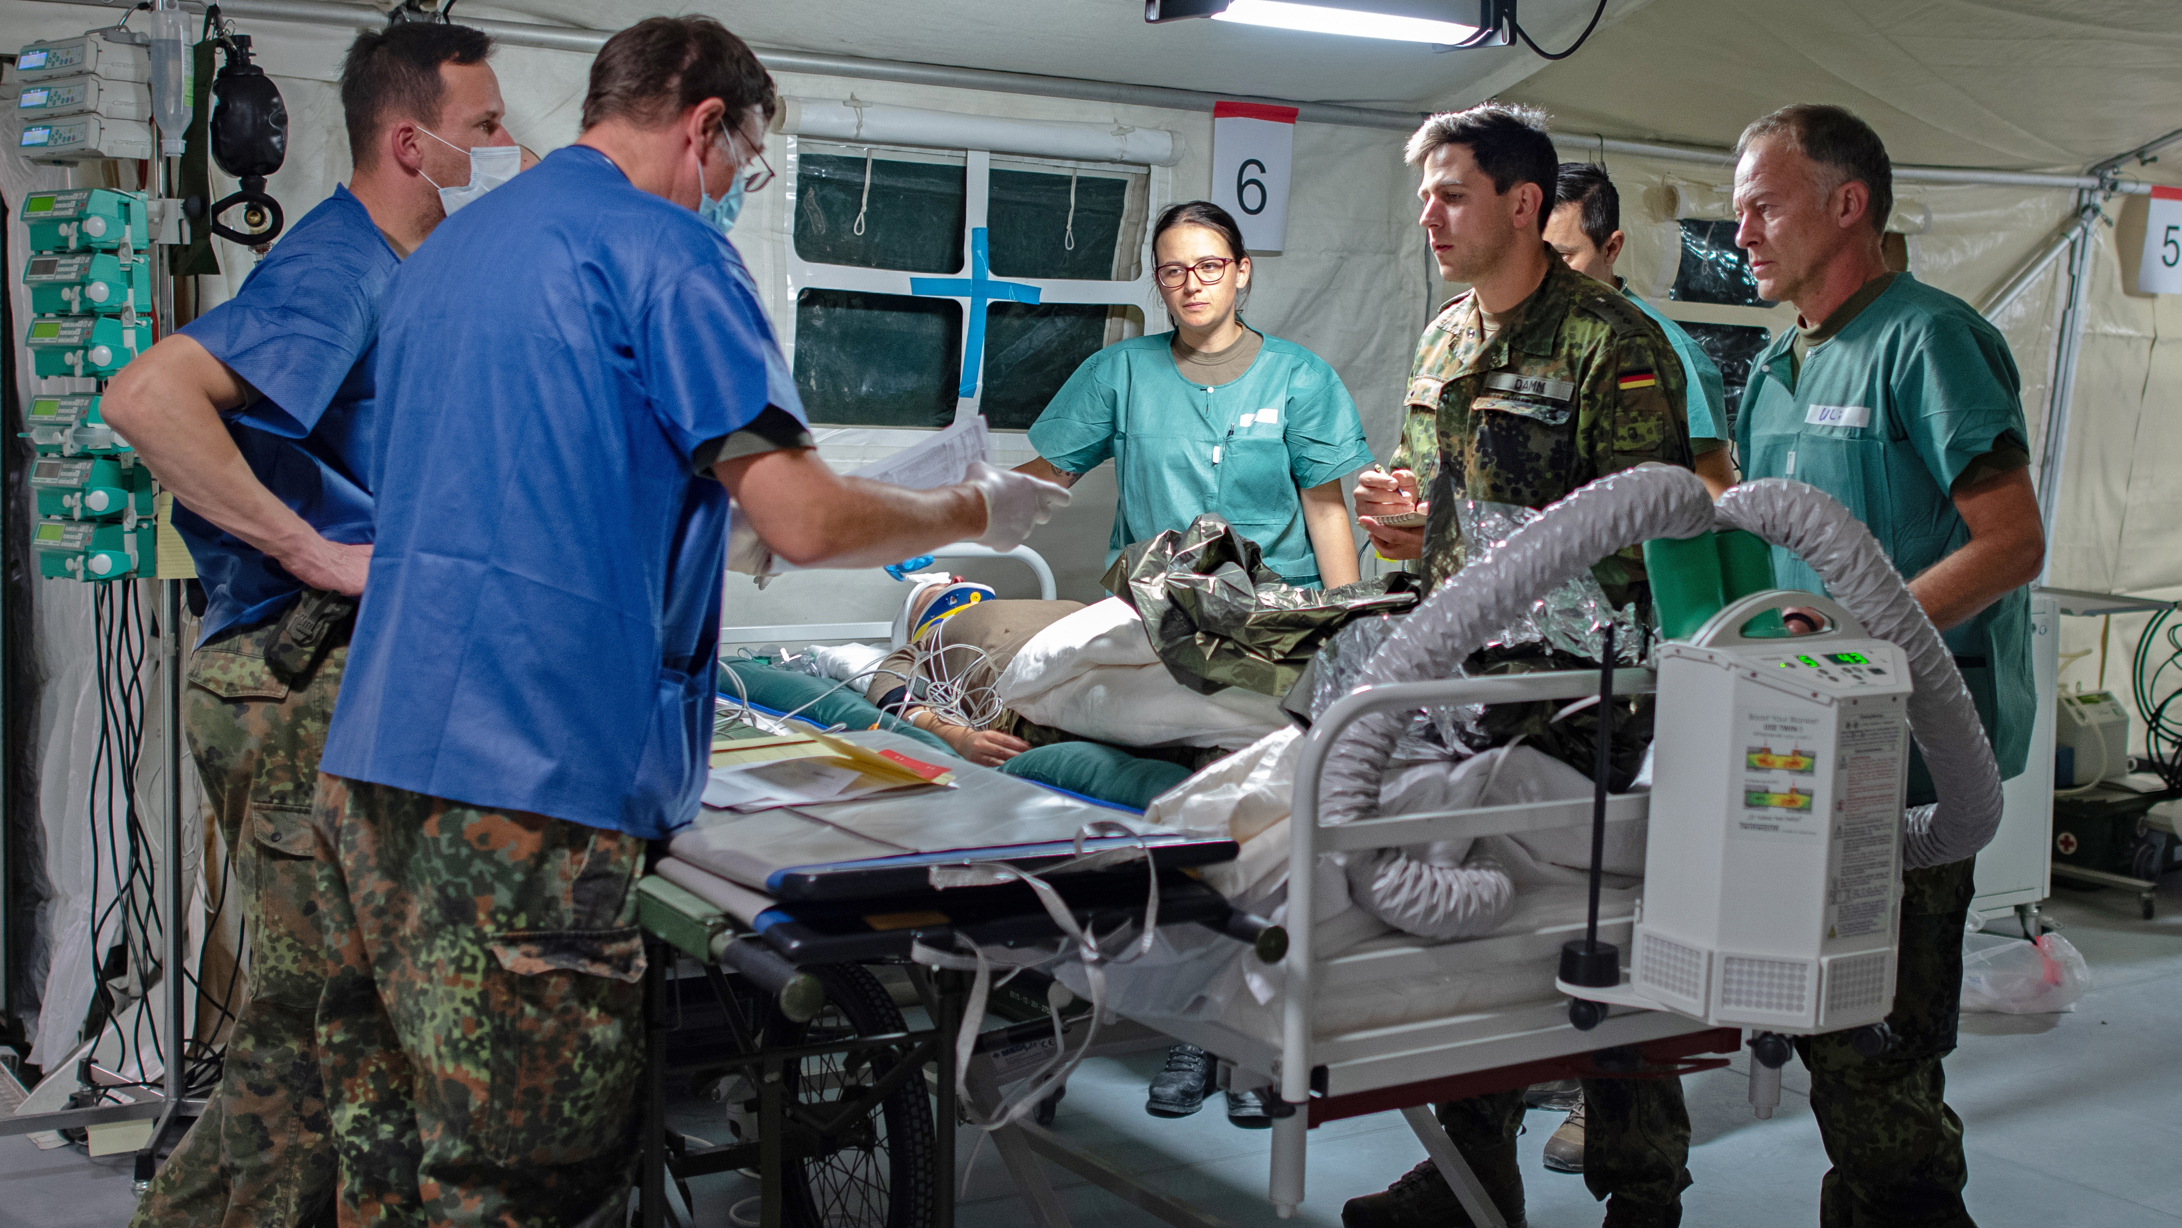 PESCO: European Medical Command project now operational